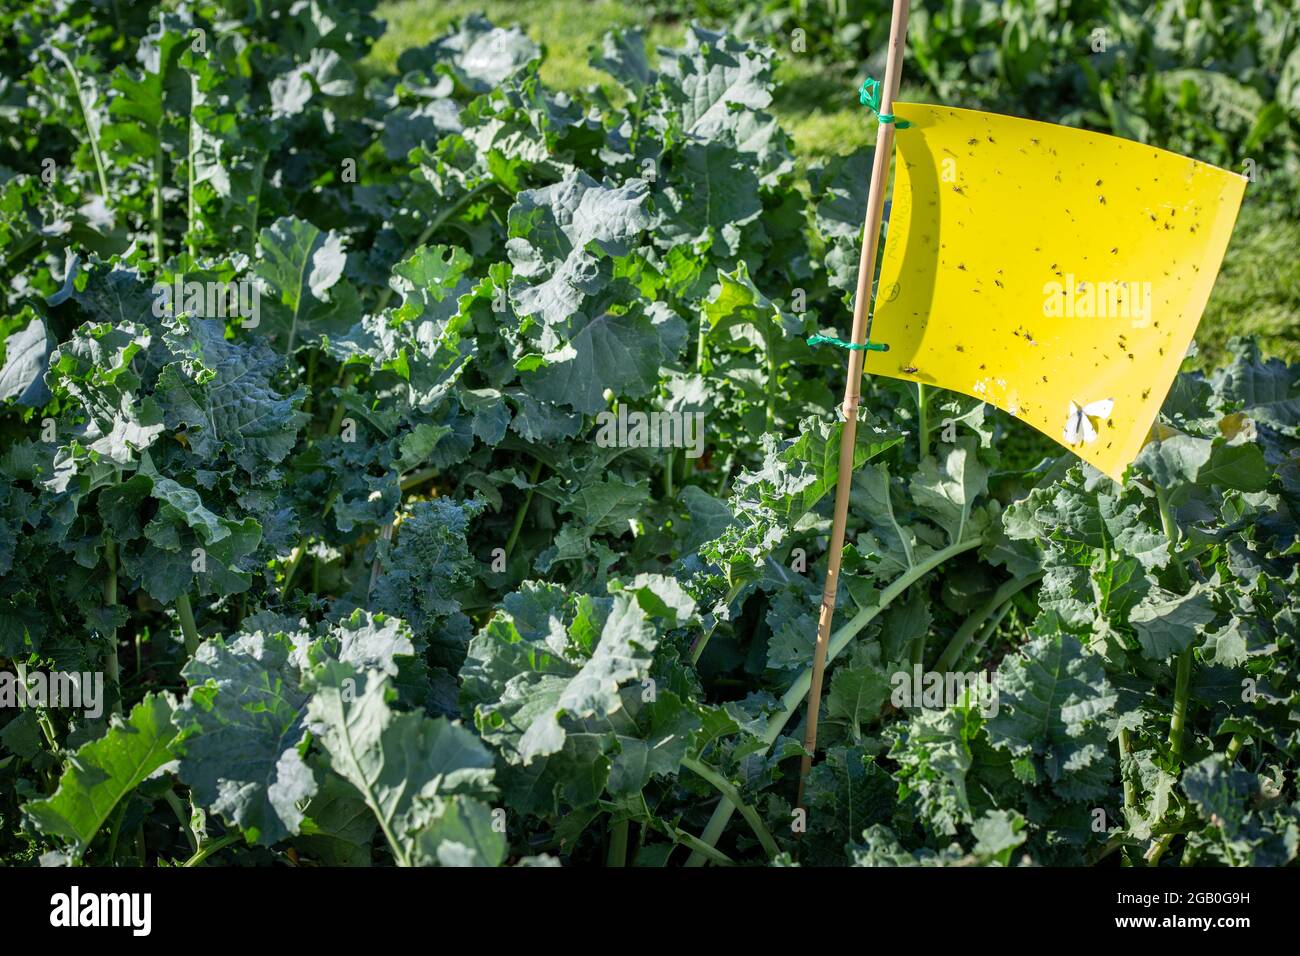 A summer brassica grown for its regrowth potential and multiple grazings, contains yellow sticky traps to enable the farmer to monitor the insect pest Stock Photo